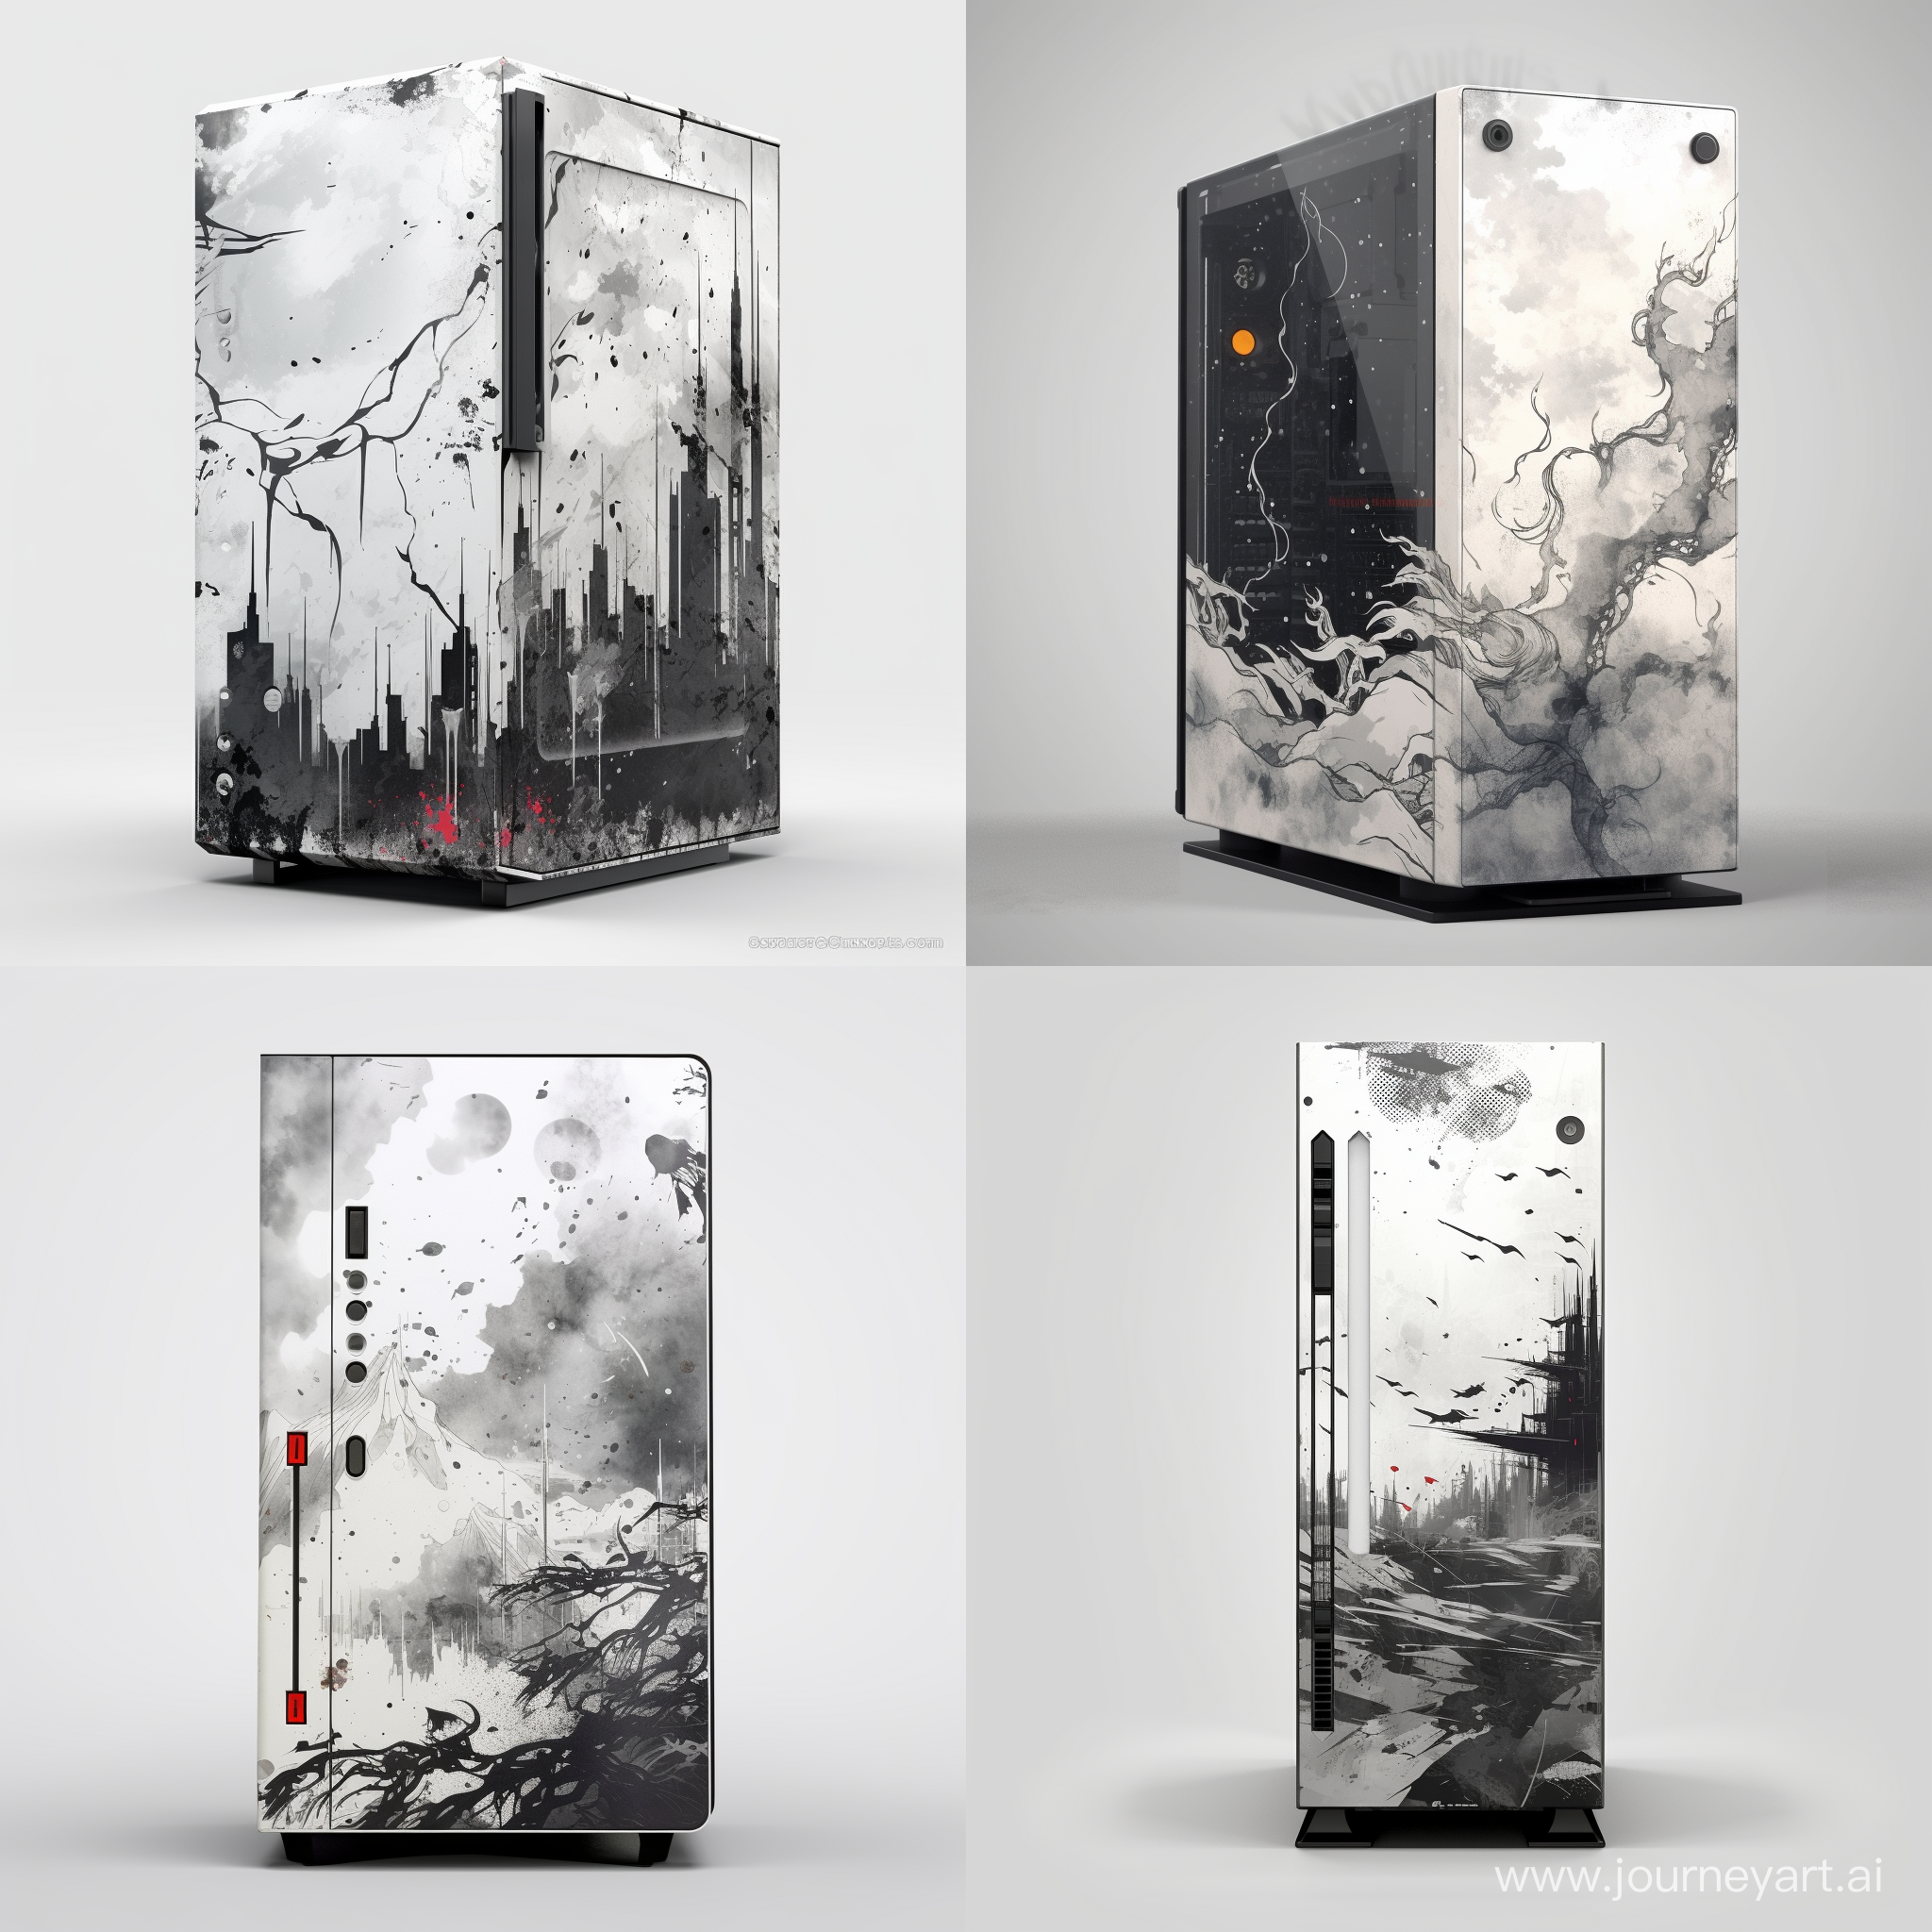 Full Tower PC with vinyl sticker with solid black and white blurs with gray splashes